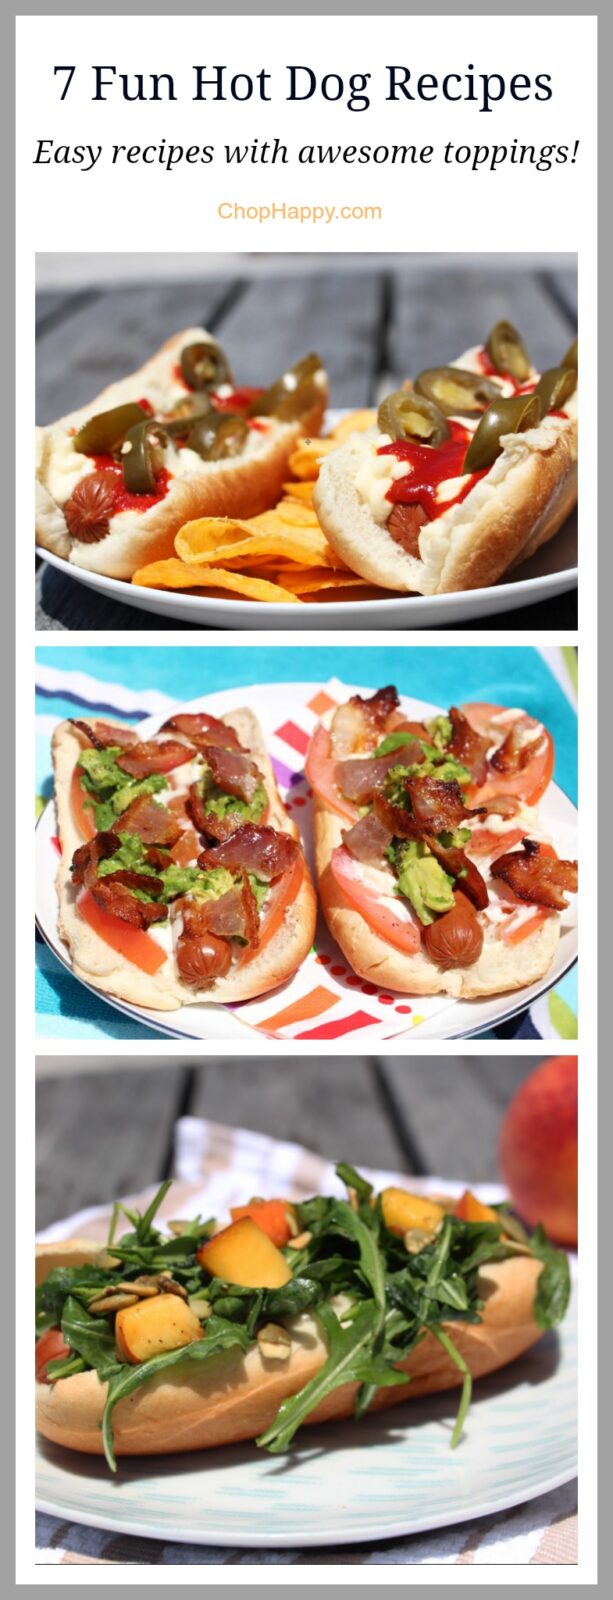 7 Fun Hot Dog Recipes that will make you want to eat them all summer. ChopHappy.com